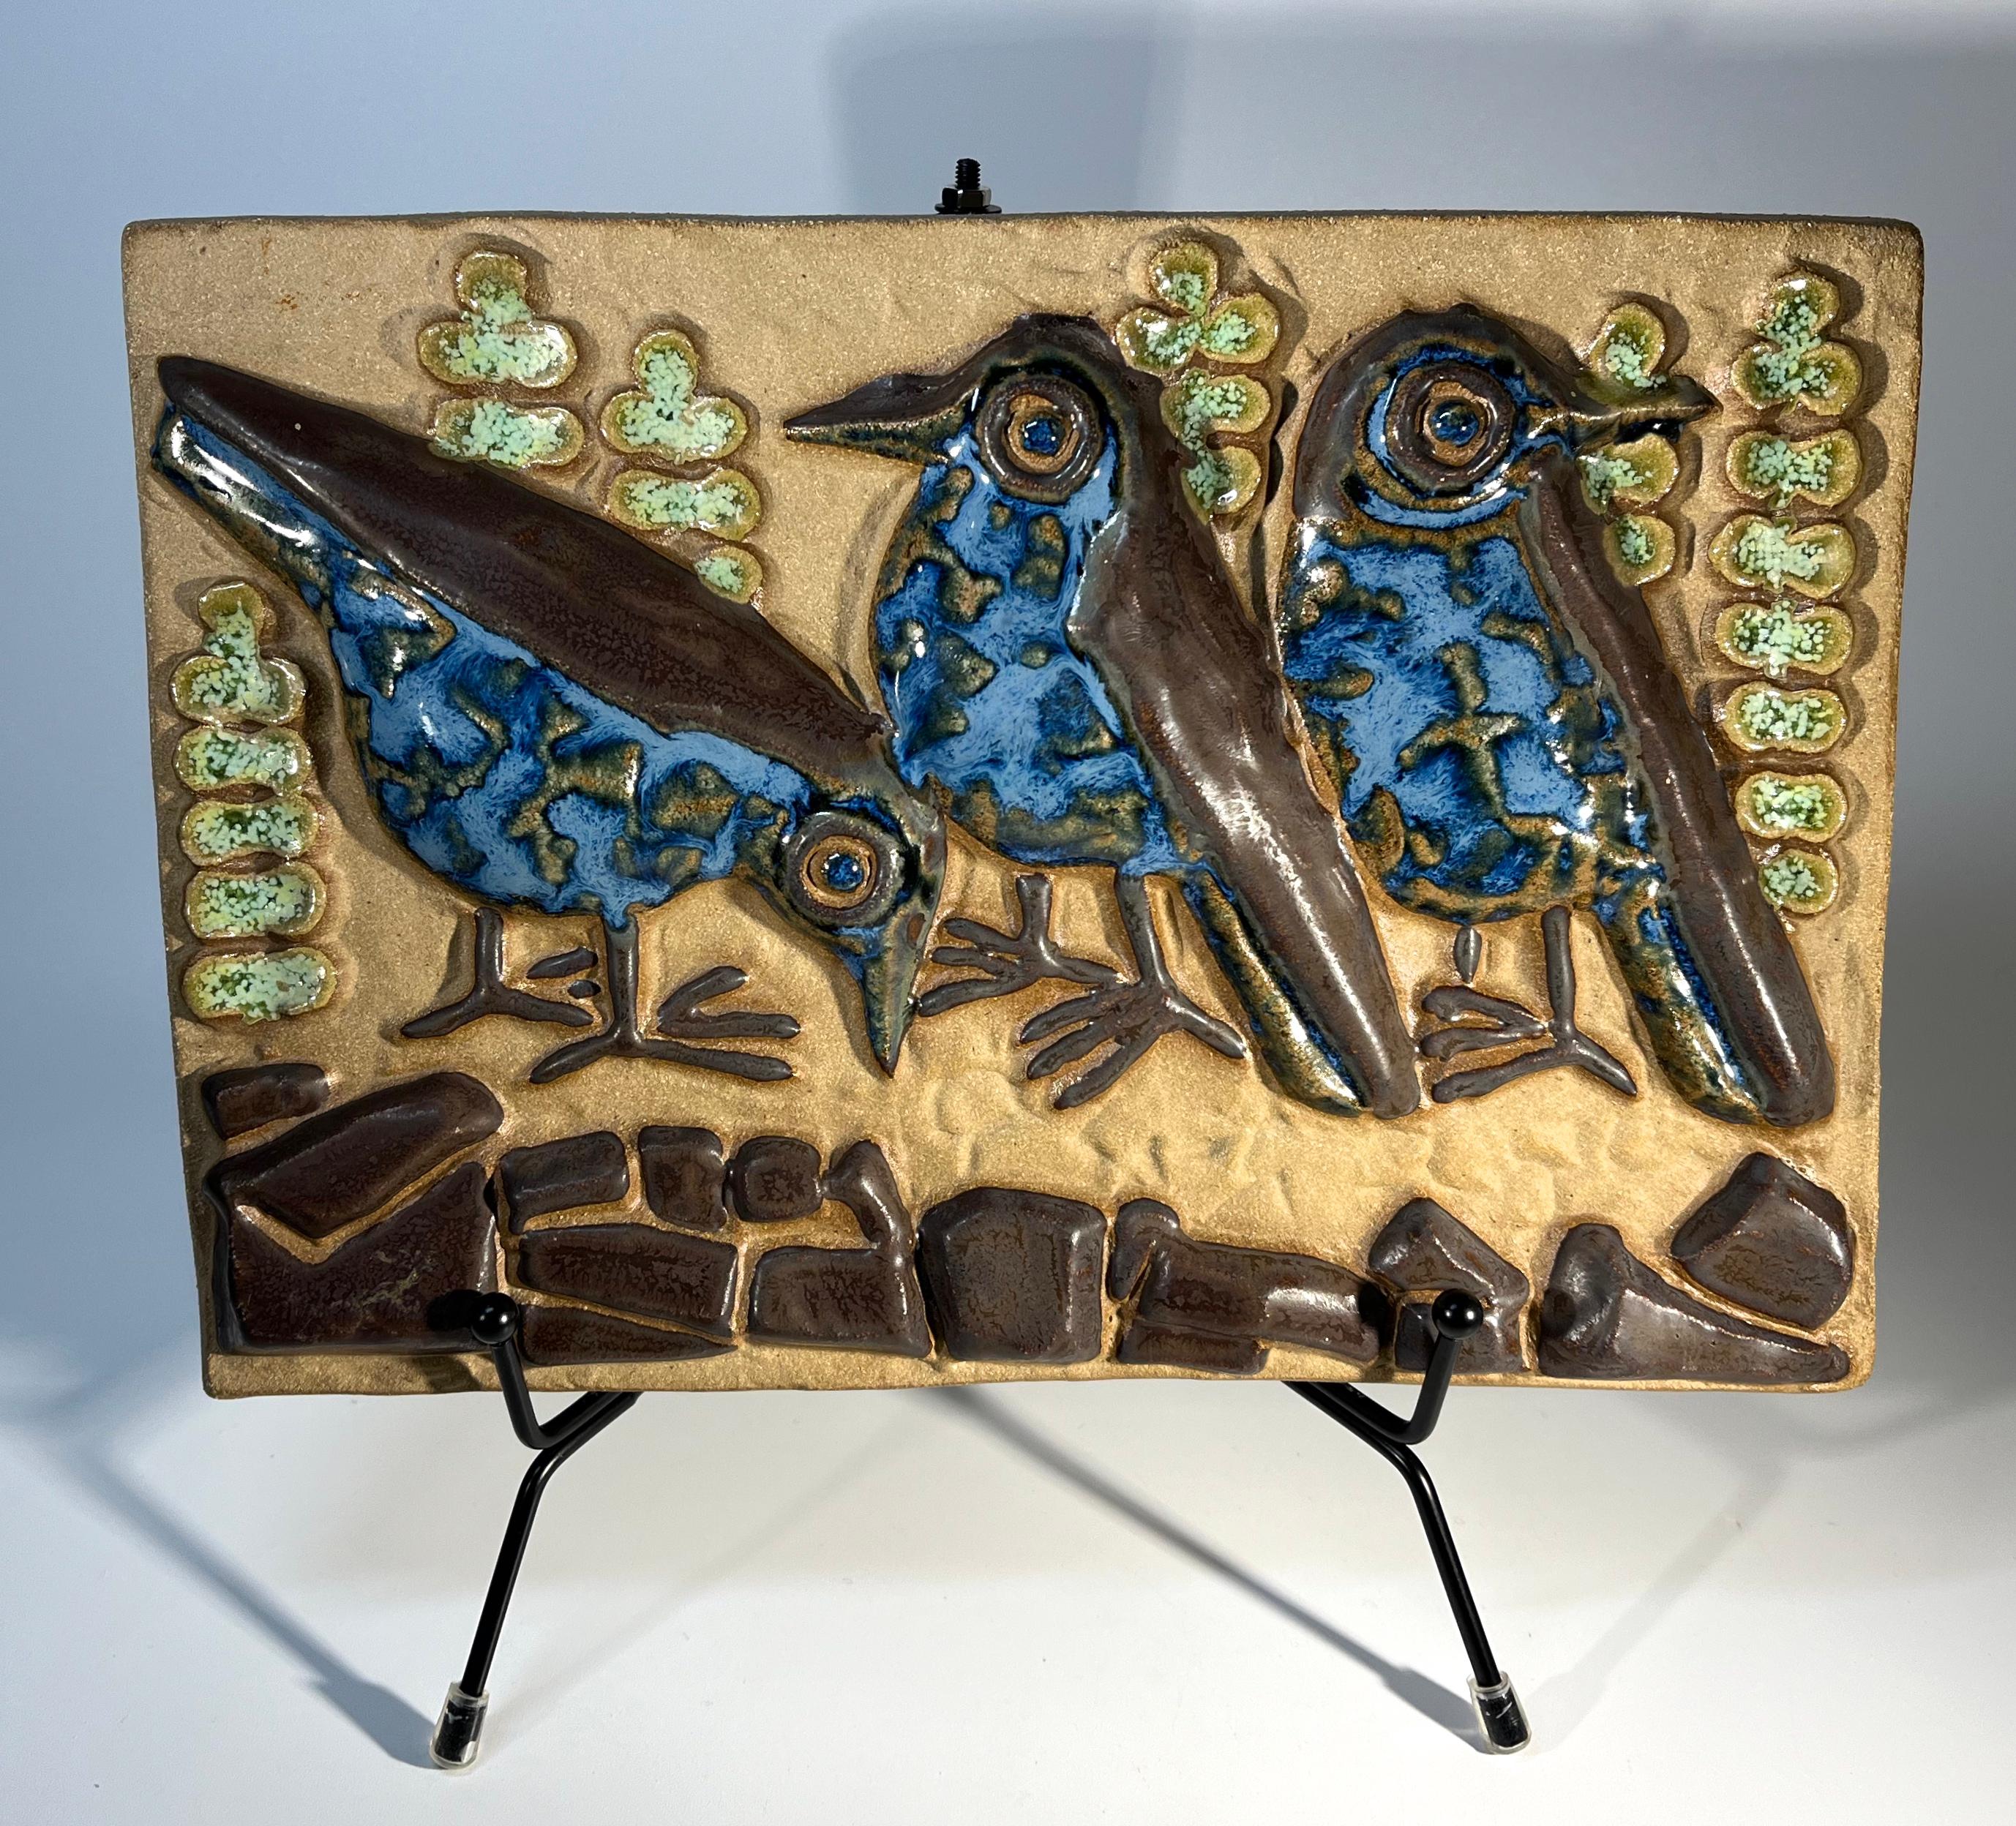 Bluebirds trio wall plaque, by Marianne Starck for Michael Andersen, Denmark 
Engaging blue glazed birds on stoneware plaque
Stamped MS, Three Herrings mark and #6267 on reverse
Width 9.5 inch, Height 6.5 inch, Depth 1 inch
Weight 3lb 3oz
In